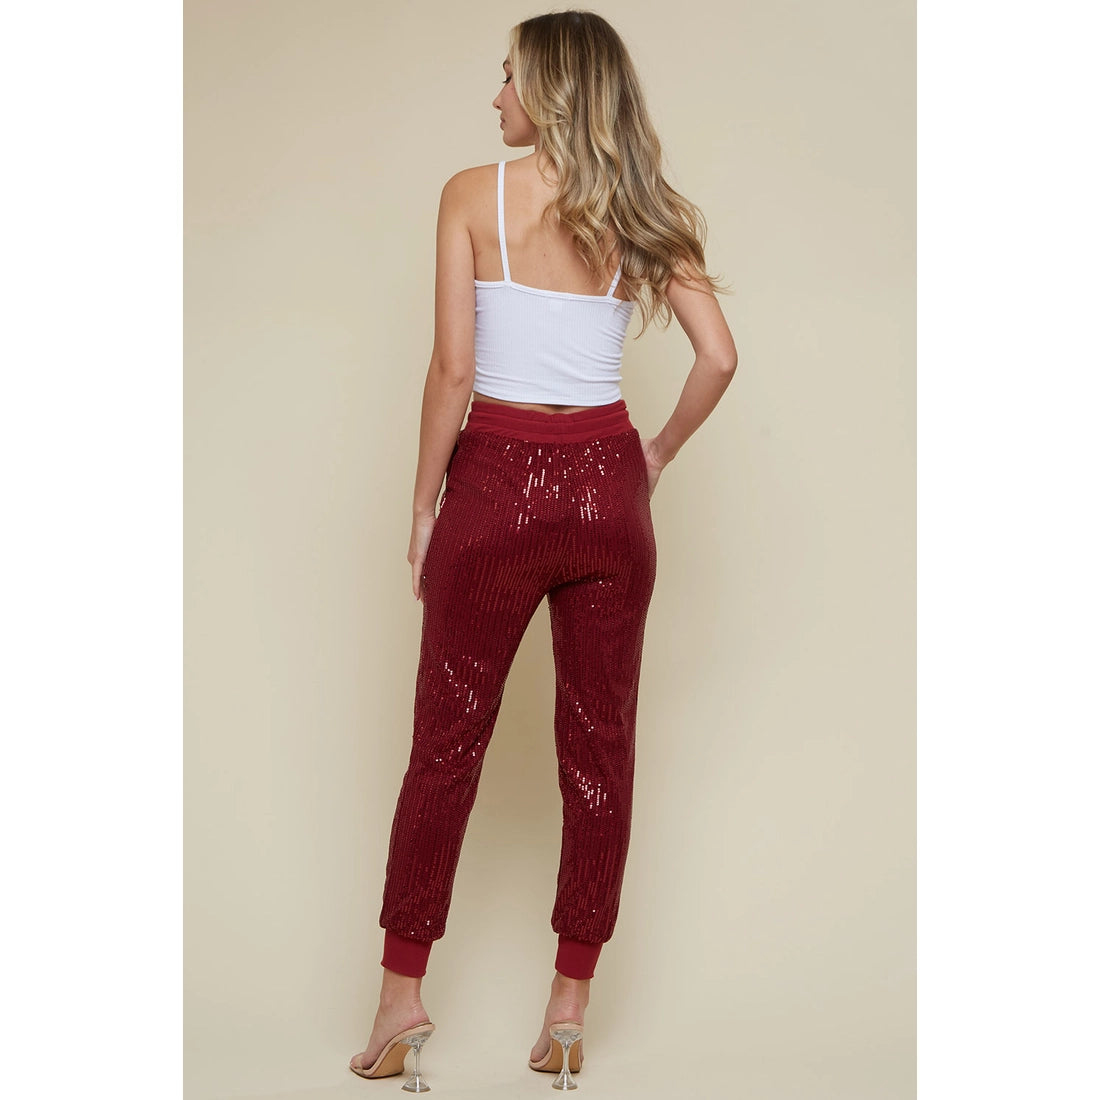 Stretchy Sequin Jogger Pants - Wine